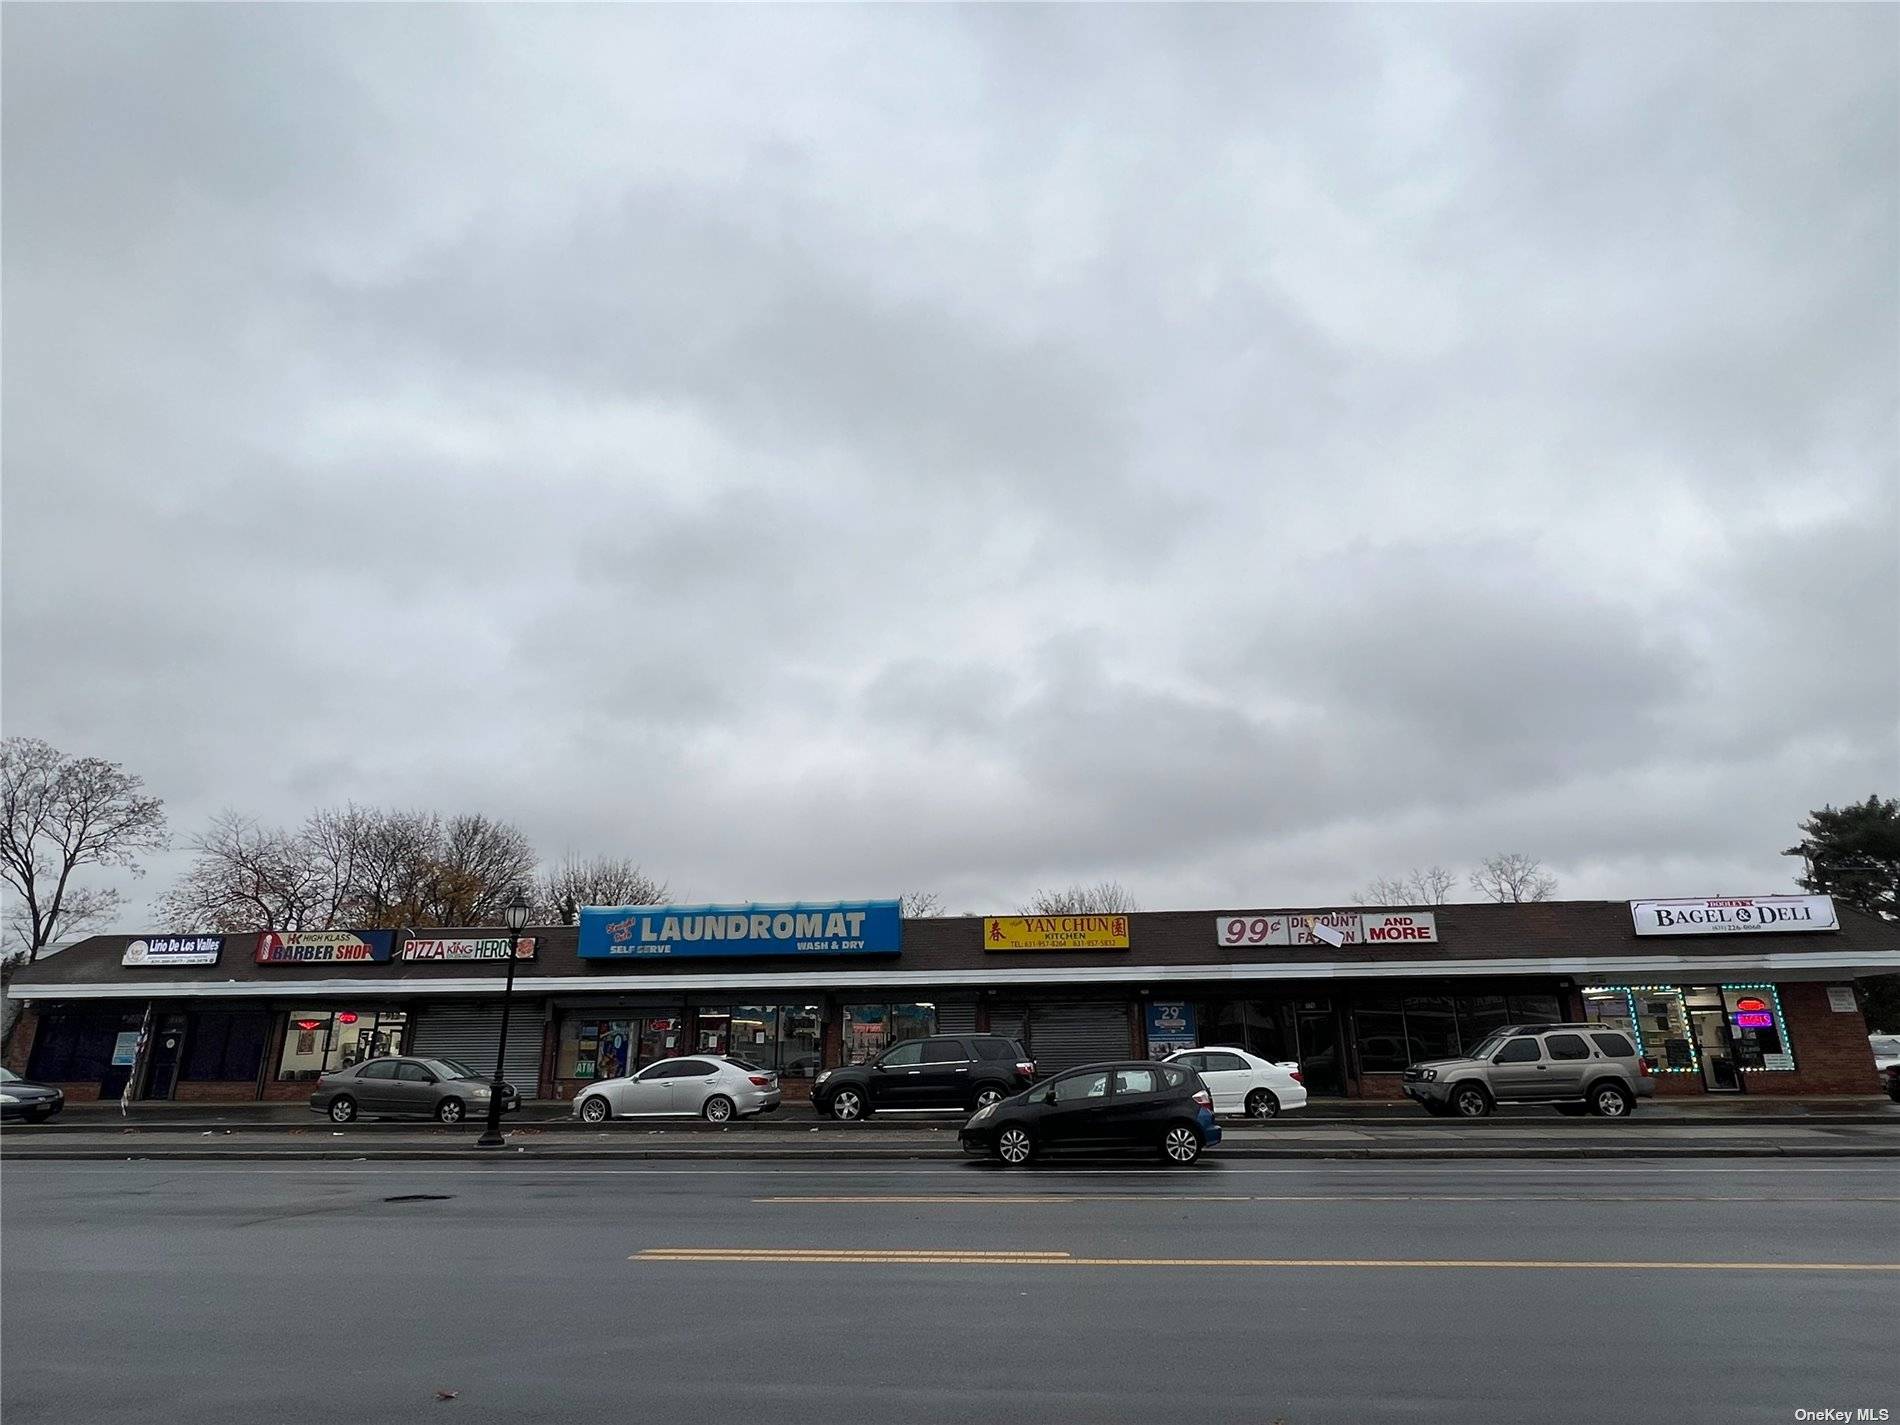 We are pleased to present the opportunity to acquire the fee simple interest land amp ; building in a absolute NNN leased investment property located in West Babylon, NY.